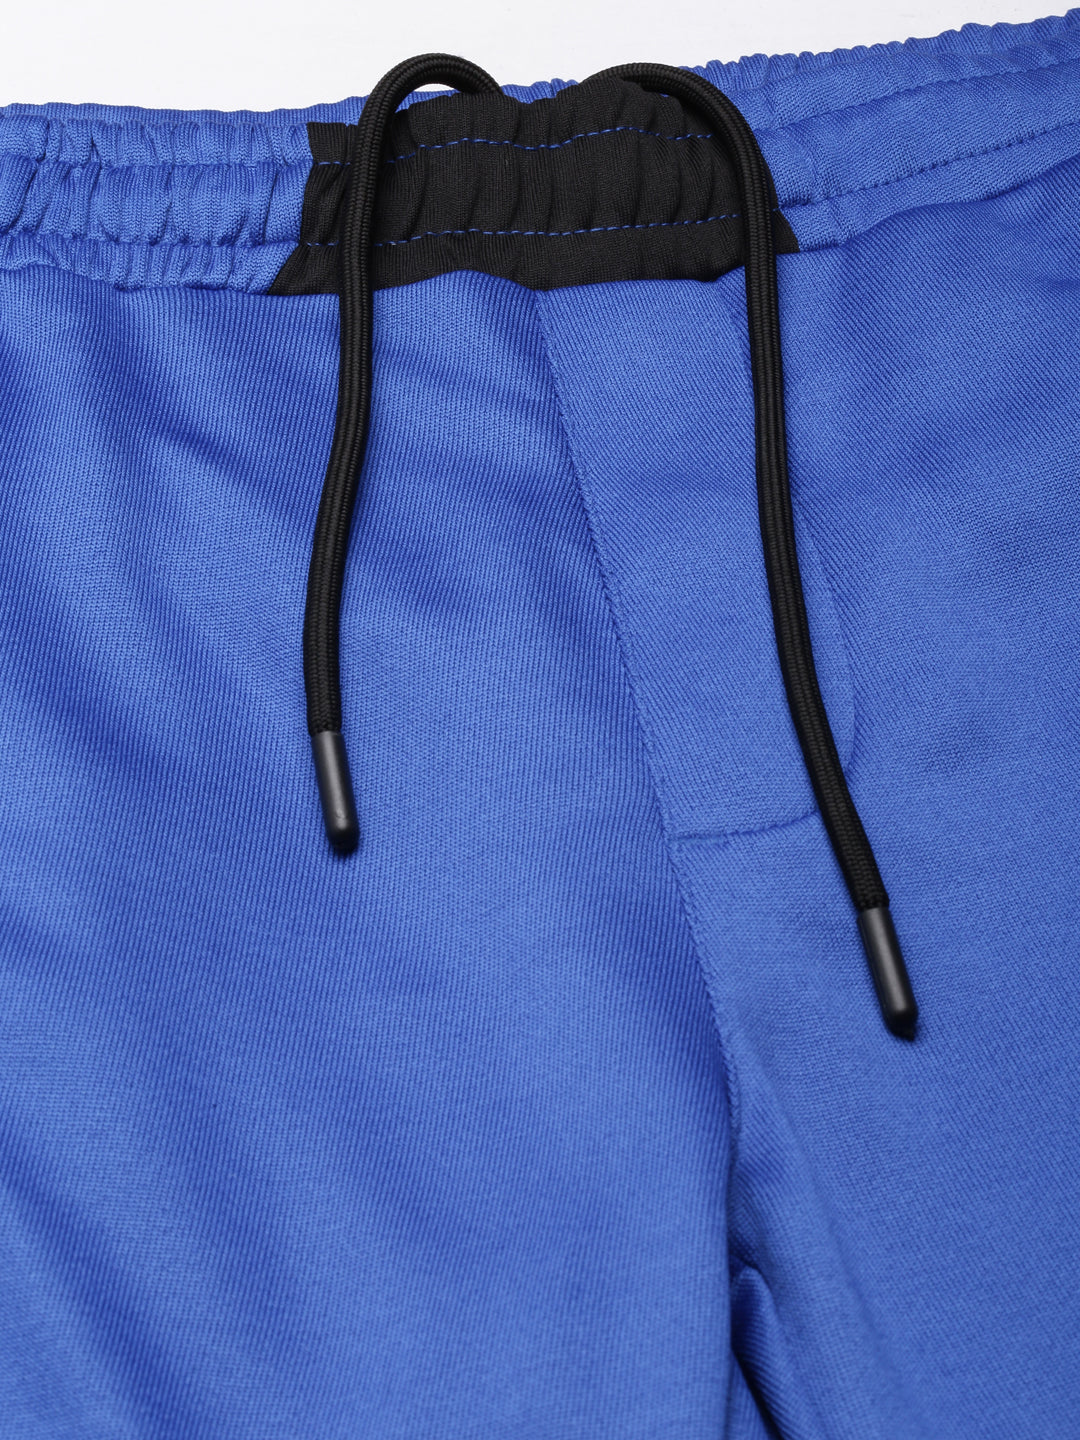 Solid Active Blue Shorts